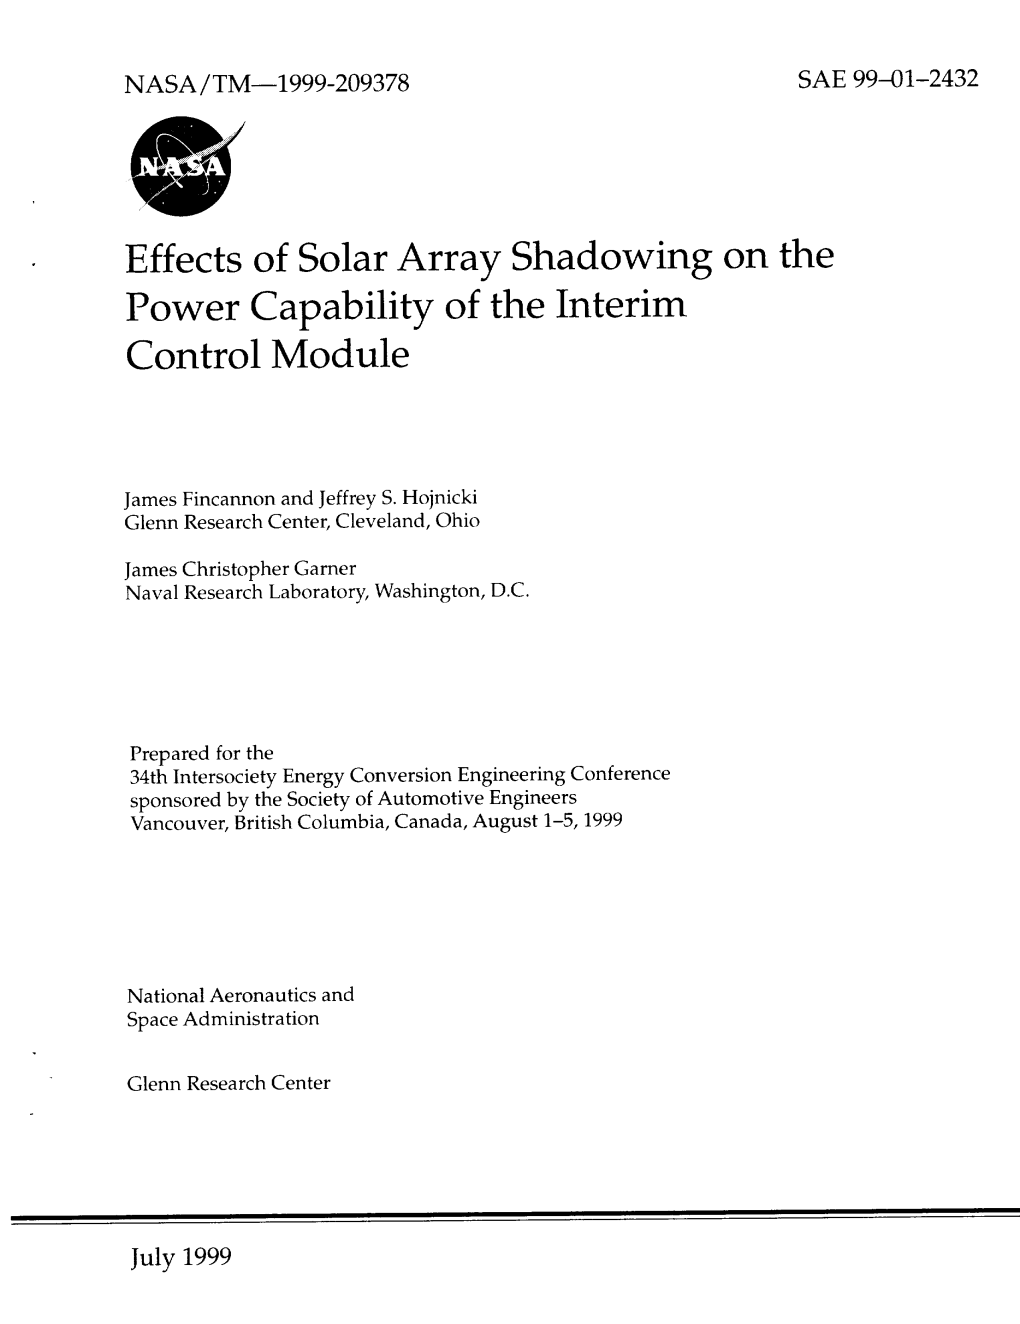 Effects of Solar Array Shadowing on the Power Capability of the Interim Control Module